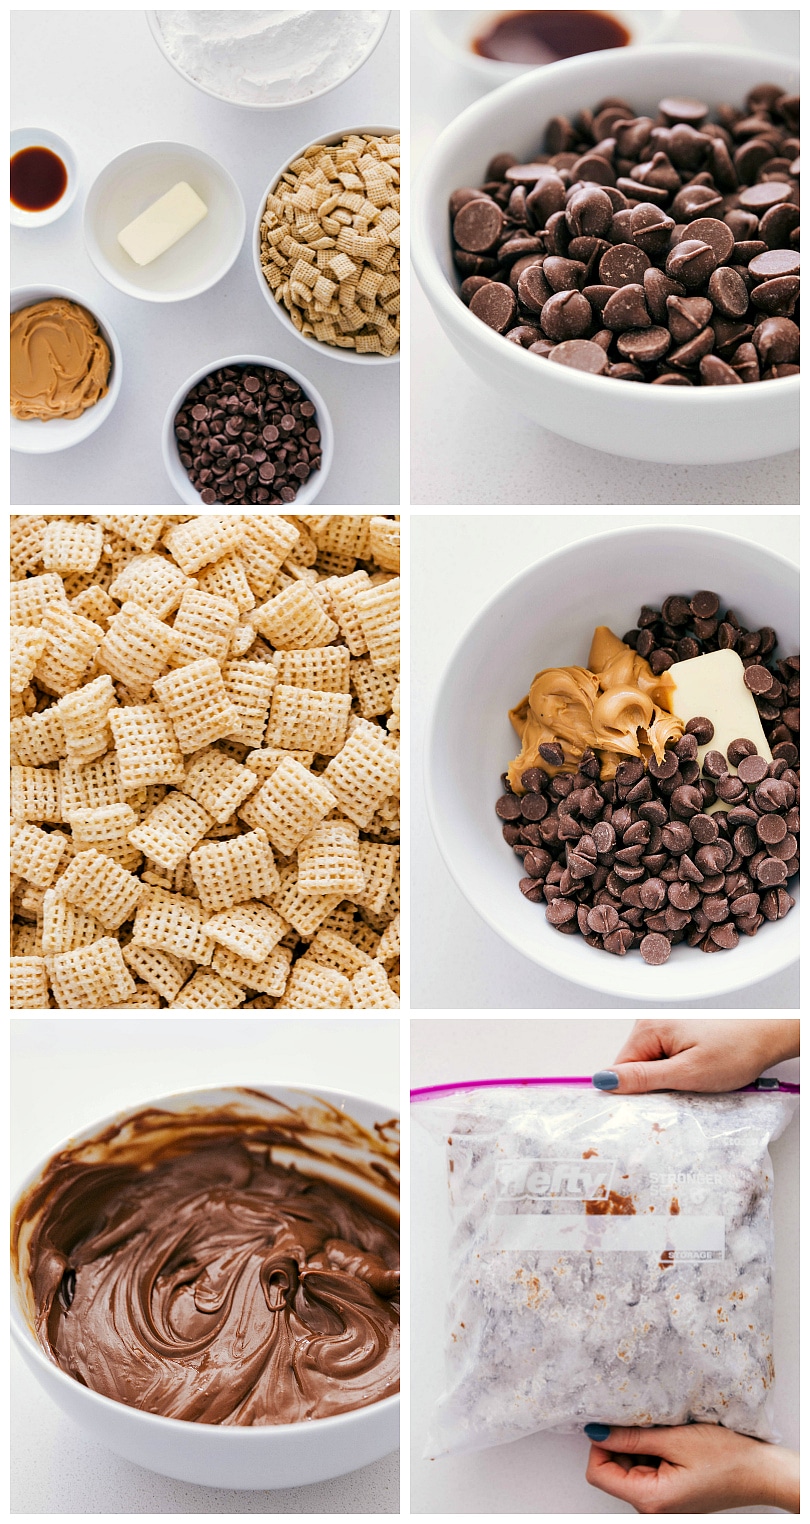 Process shots-- images of the ingredients being melted and added to the Chex cereal.